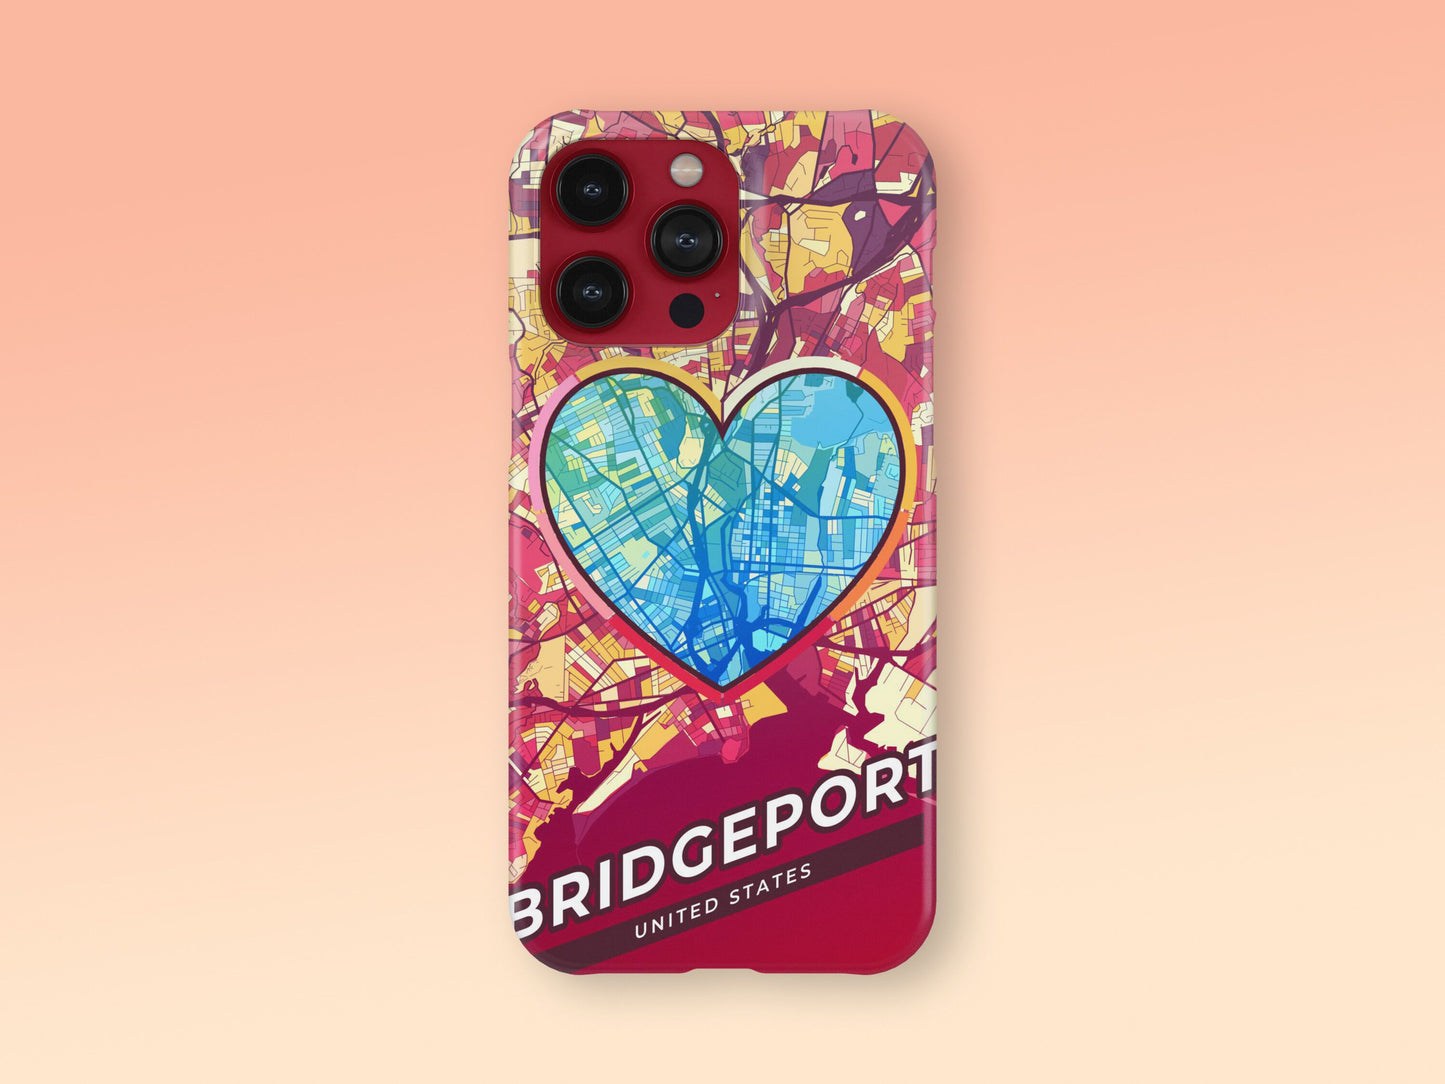 Bridgeport Connecticut slim phone case with colorful icon. Birthday, wedding or housewarming gift. Couple match cases. 2